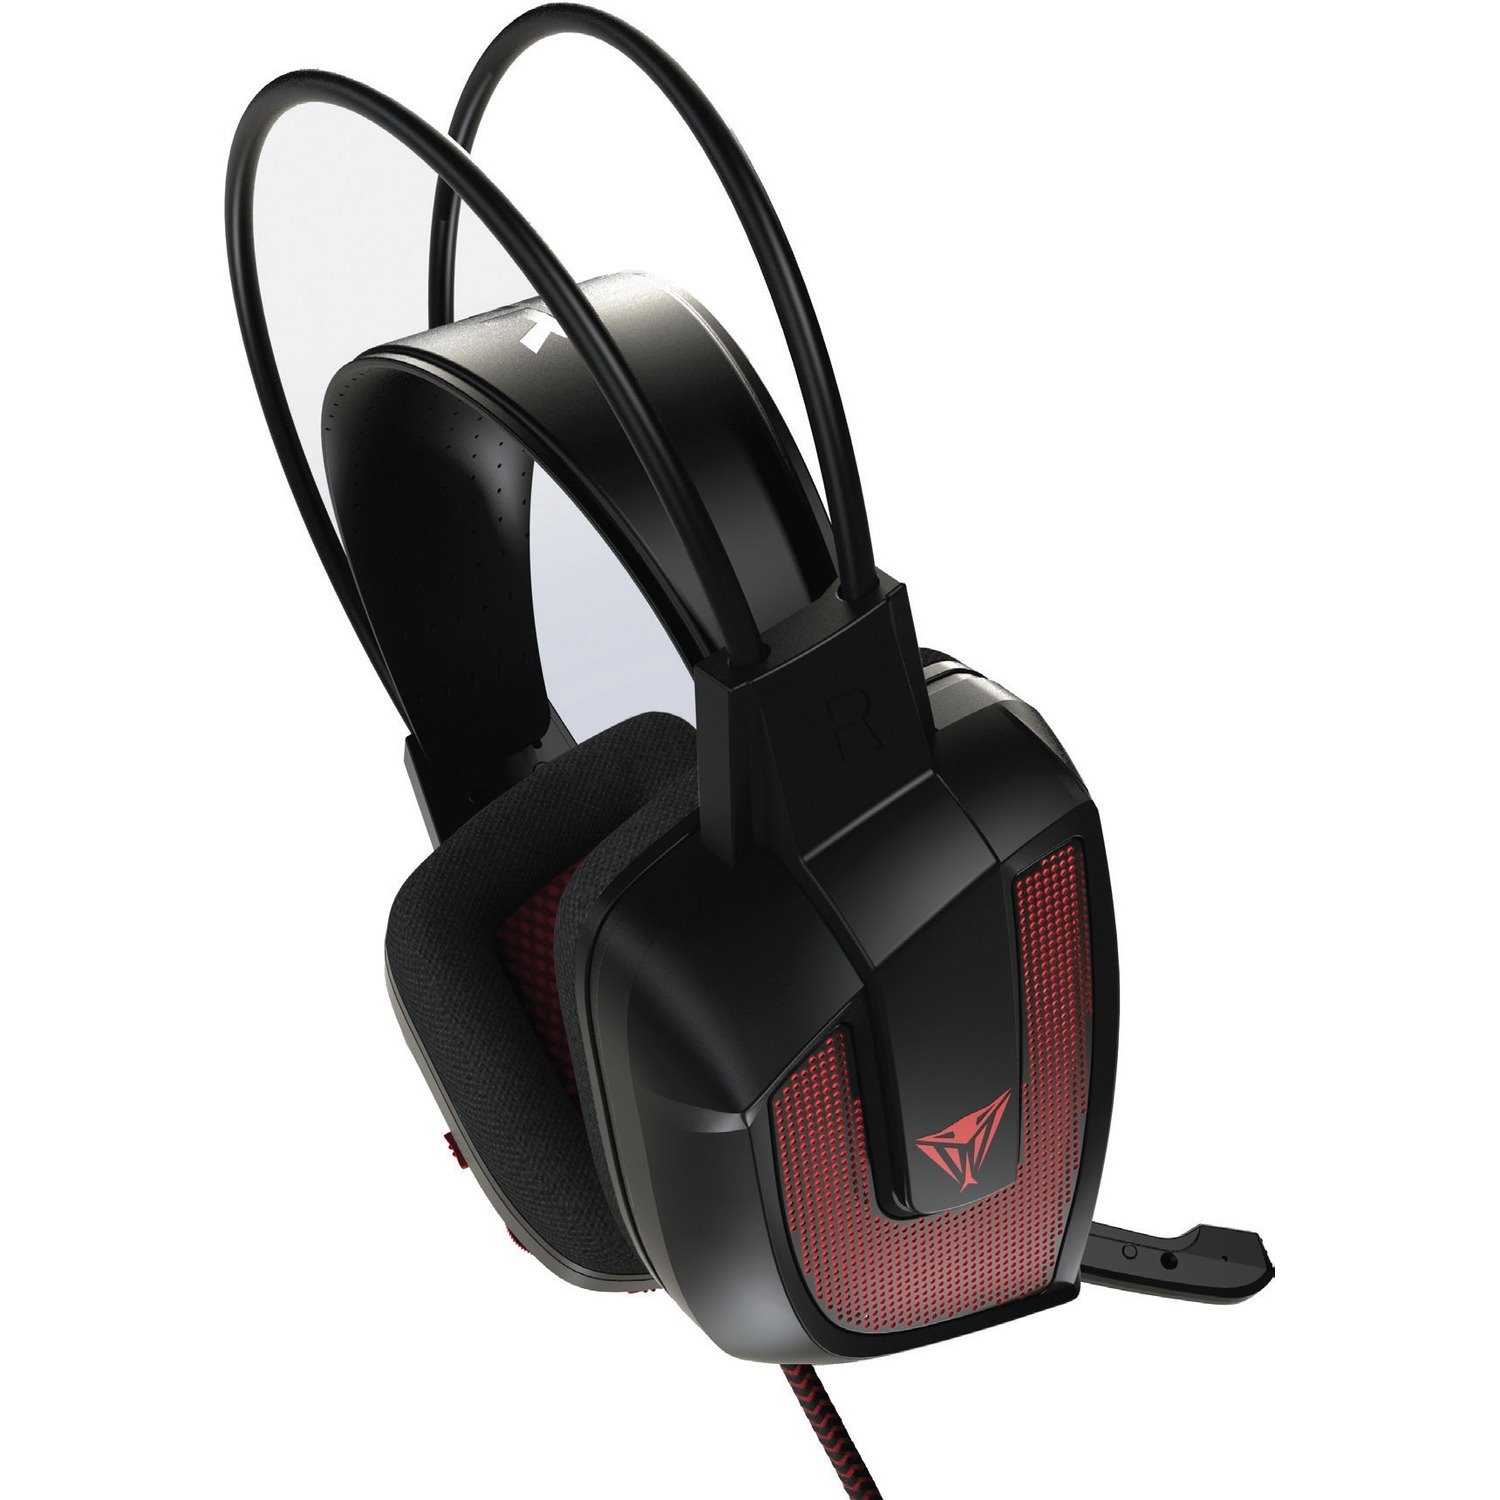 Patriot Memory Viper V360 Wired Over-the-head Headset - Black, Red